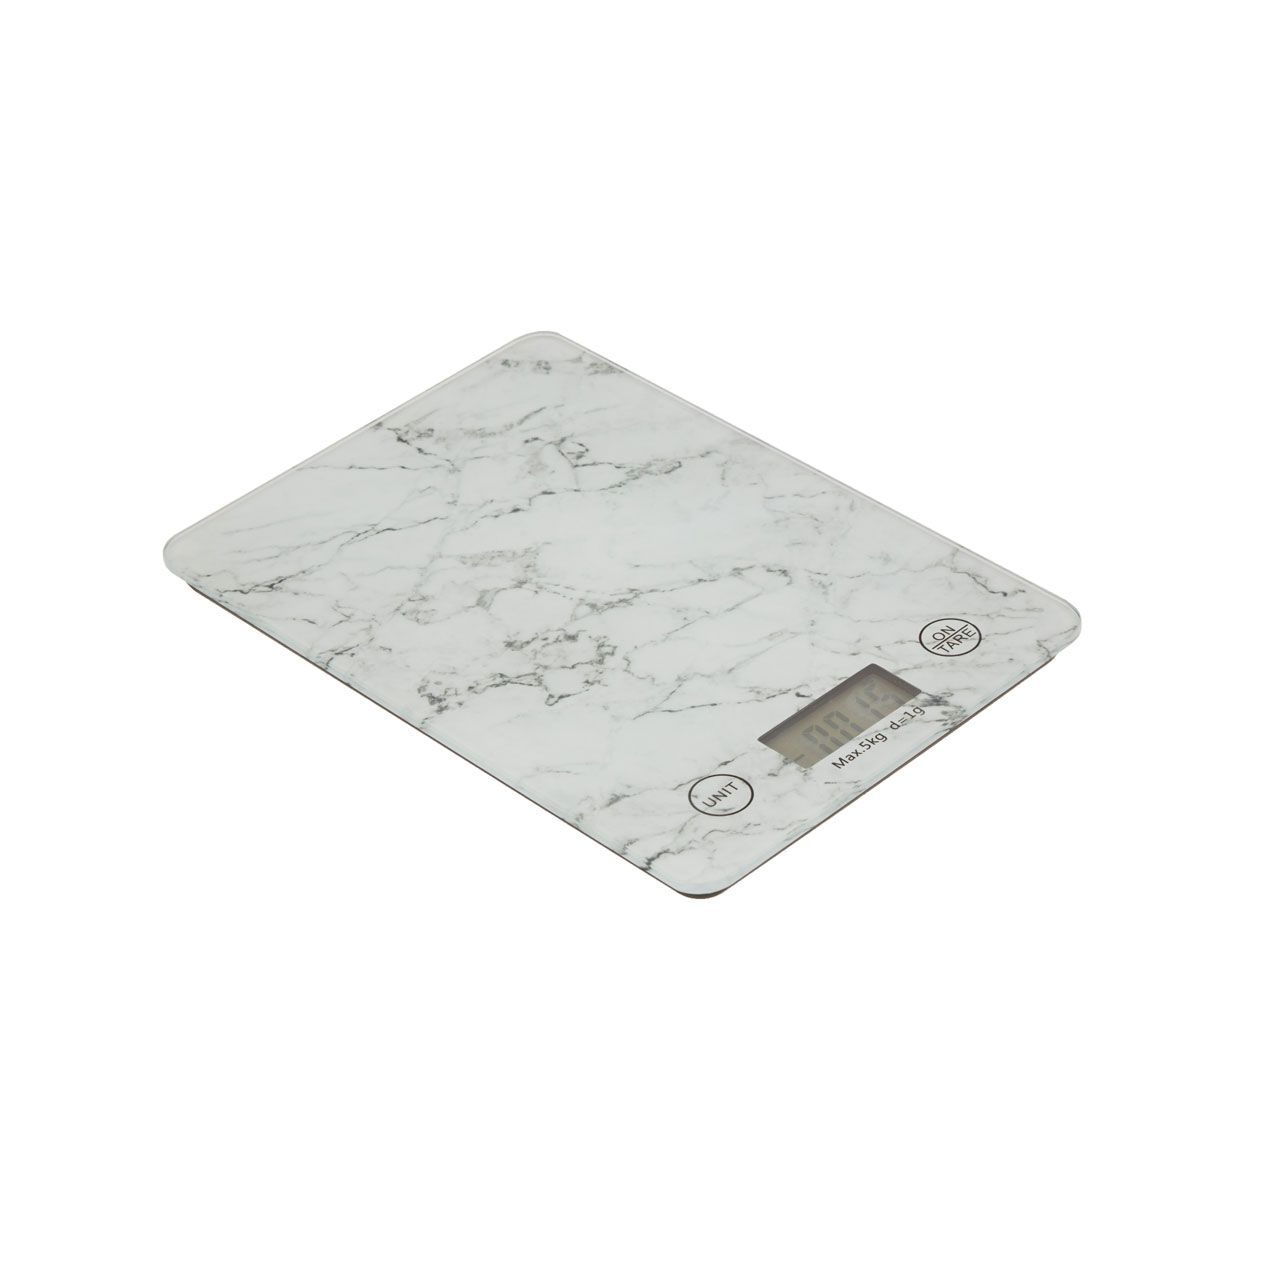 Marble Grey Digital Glass Kitchen Weighing Scales 5KG Capacity